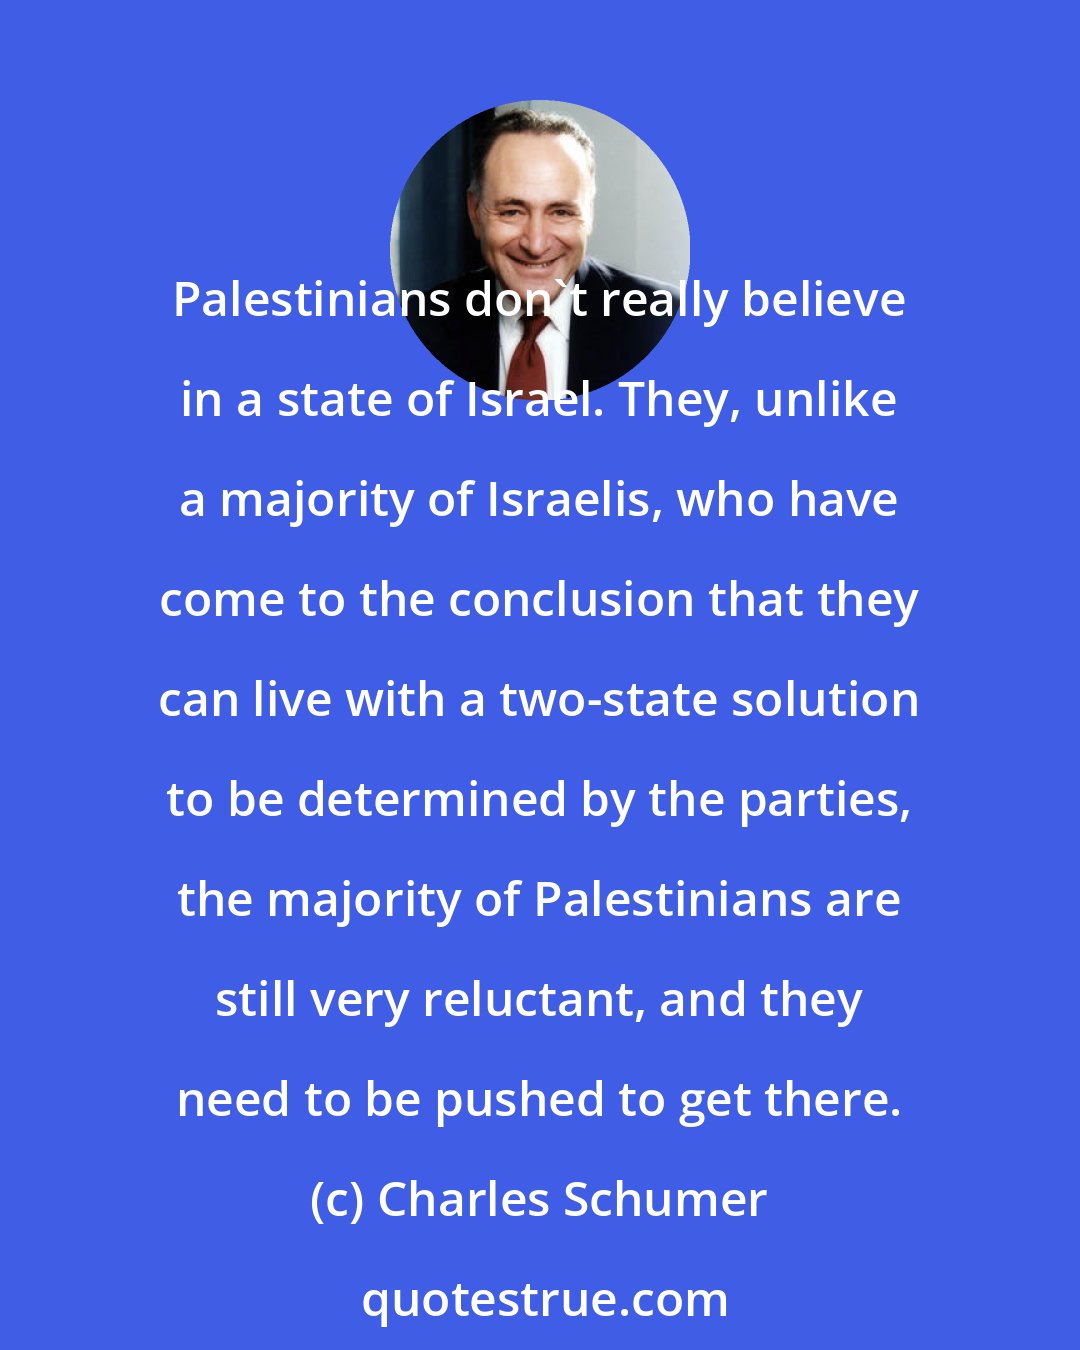 Charles Schumer: Palestinians don't really believe in a state of Israel. They, unlike a majority of Israelis, who have come to the conclusion that they can live with a two-state solution to be determined by the parties, the majority of Palestinians are still very reluctant, and they need to be pushed to get there.